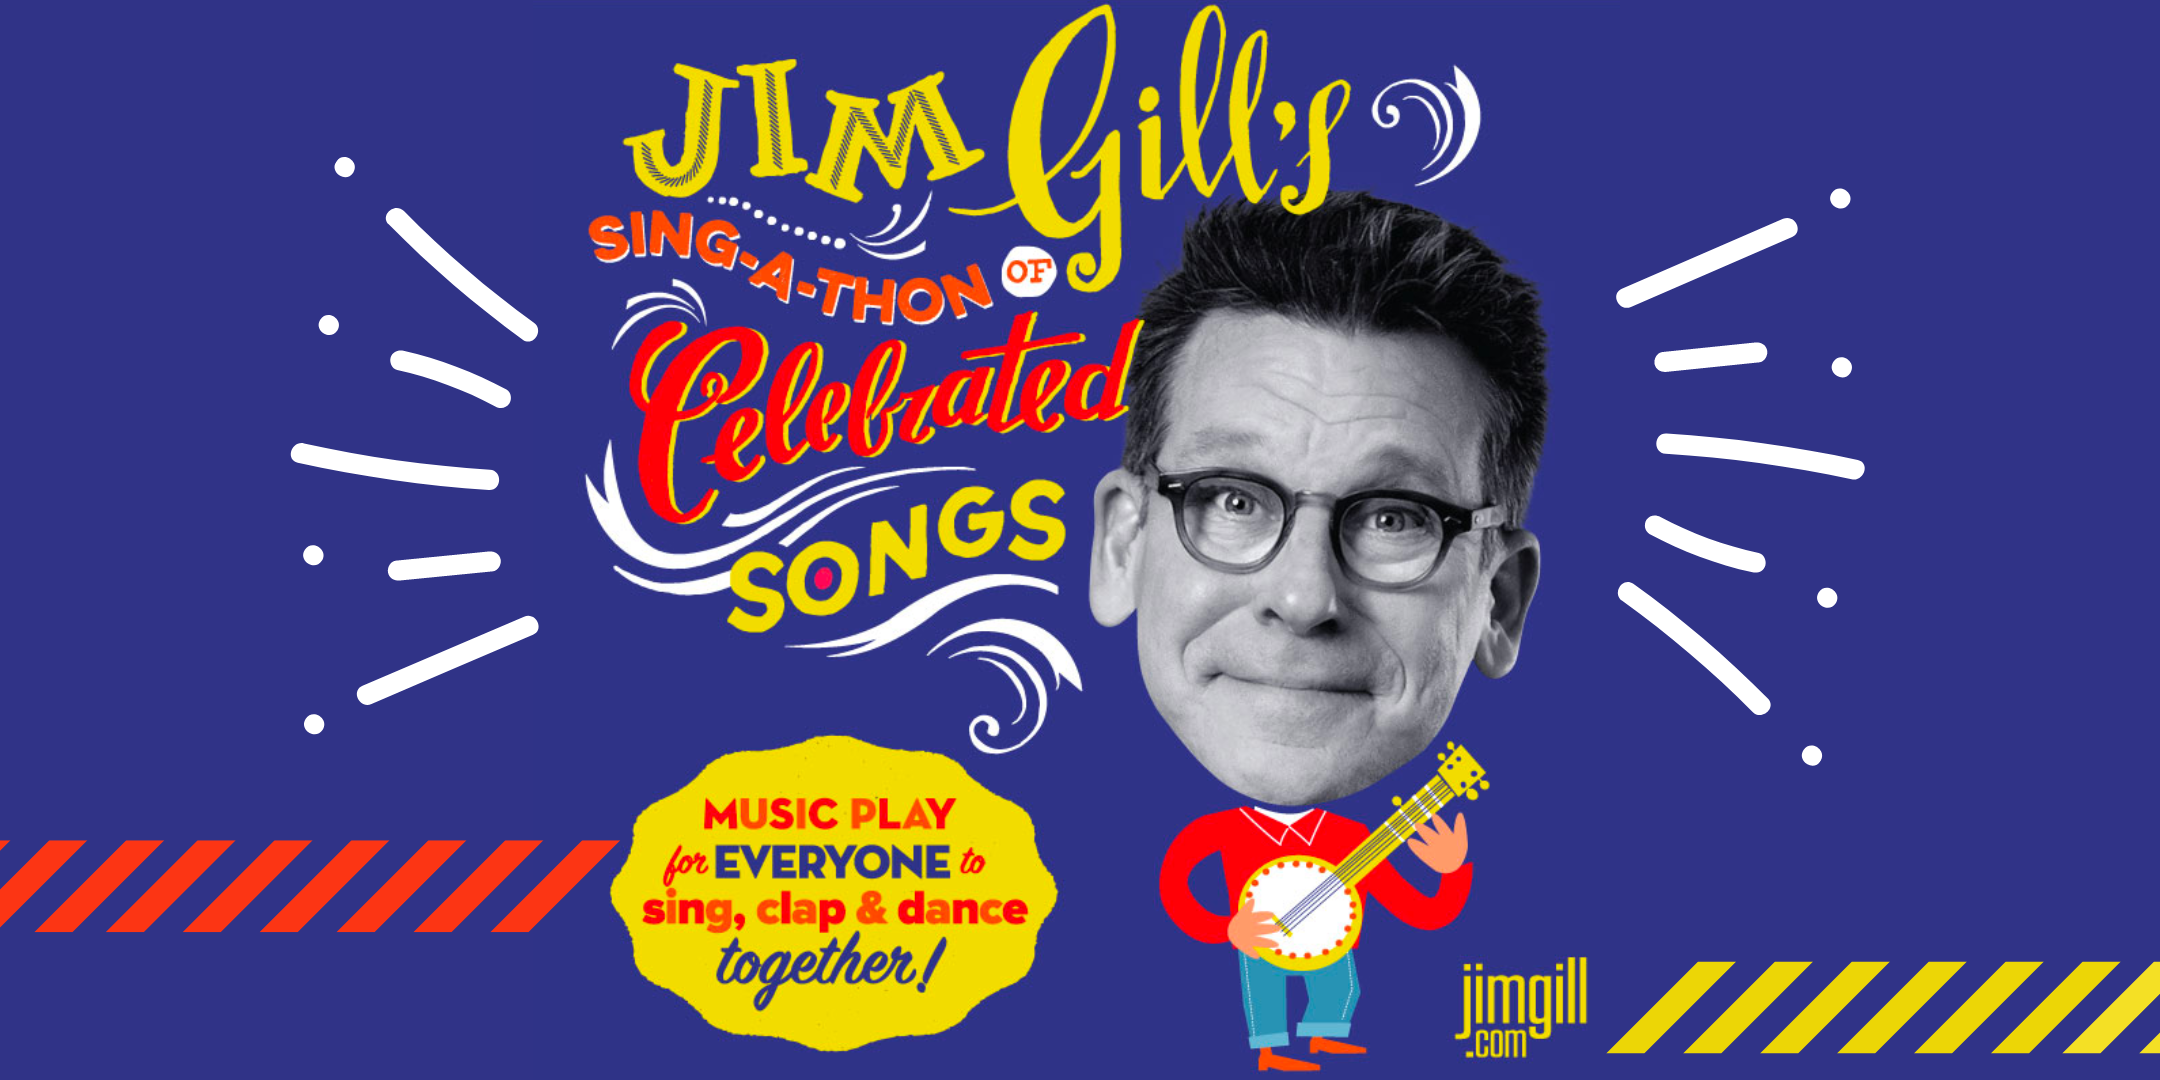 image of text stating Jim Gill's Sing-a-thon of Celebrated Songs in red and yellow, with Jim Gill as a graphic with an enlarged head on a cartoon body playing his guitar with decorative elements in red, yellow, and white on a dark blue background.